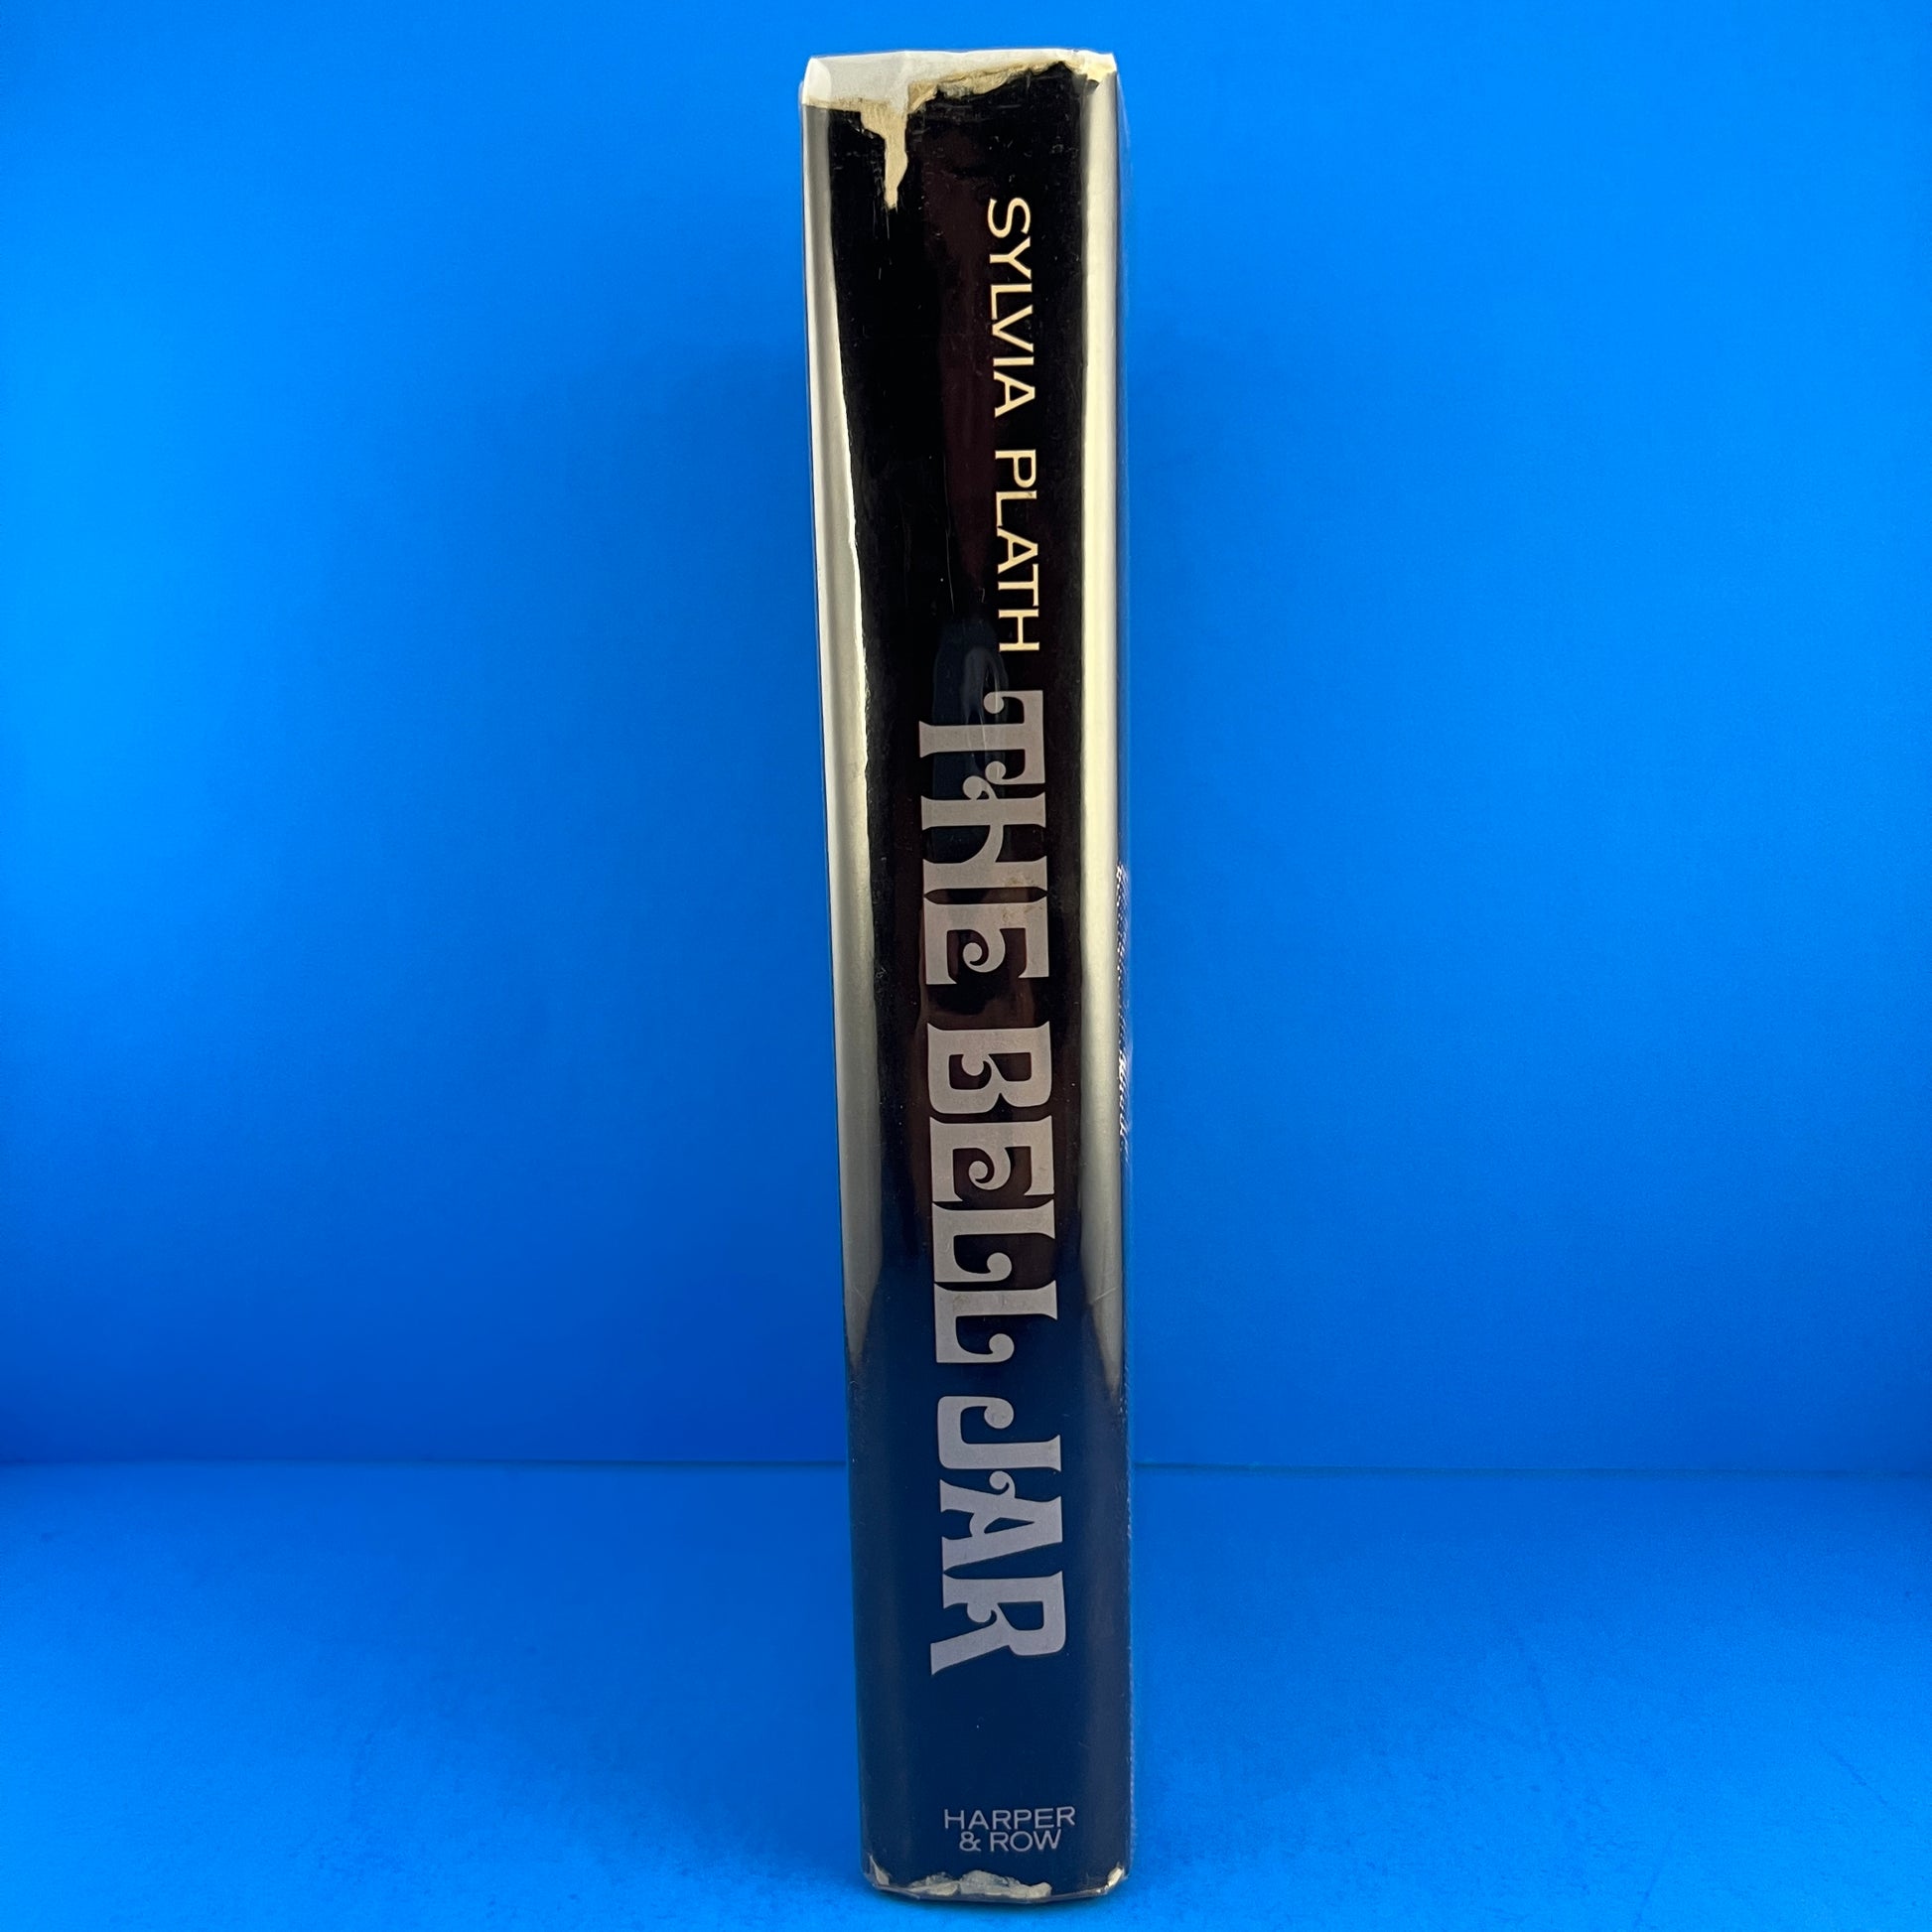 The Bell Jar by Sylvia Plath, Hardcover